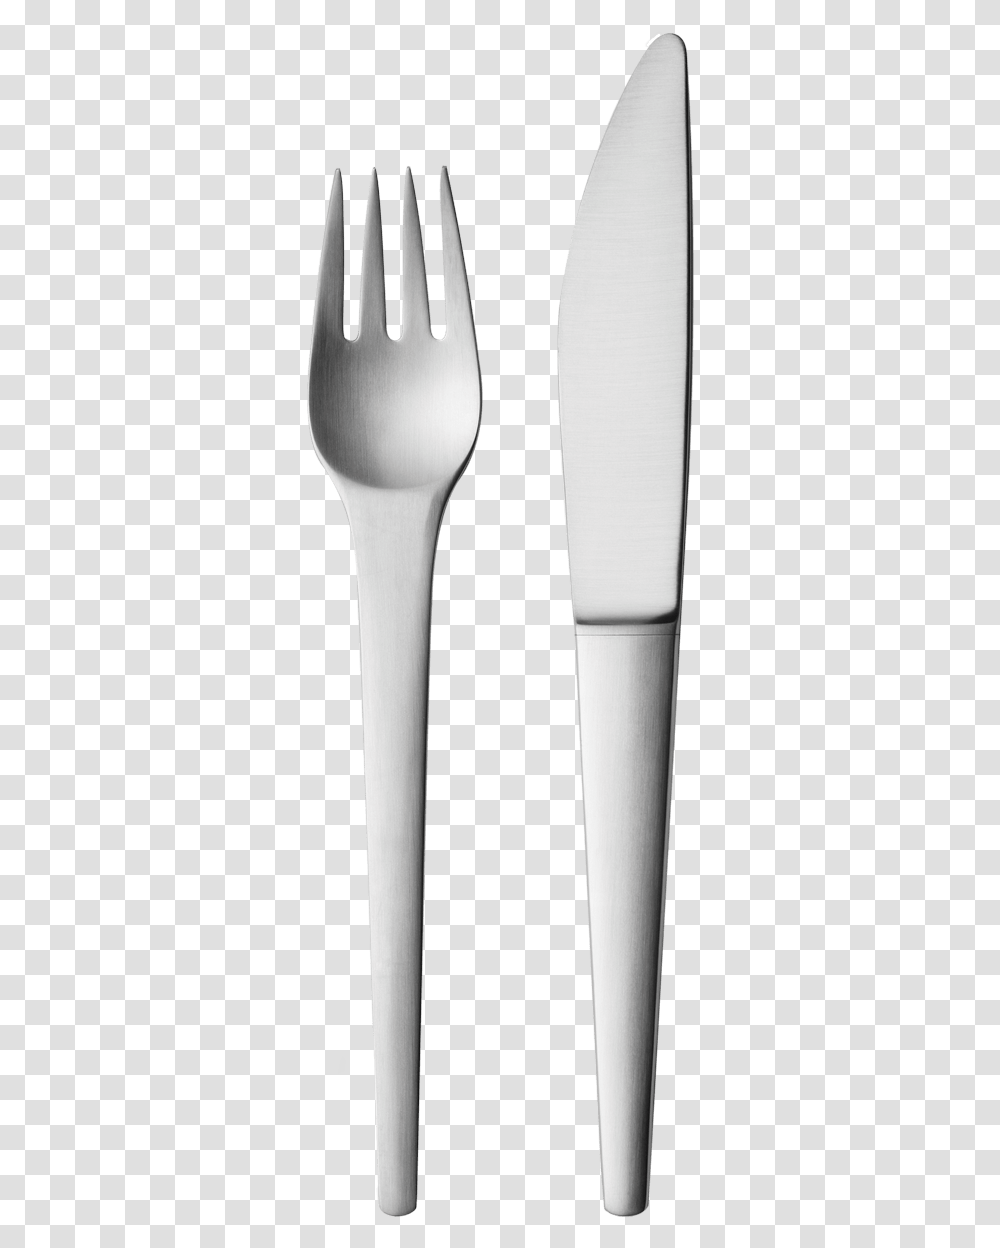 Table Knife Background Knife And Fork, Cutlery Transparent Png